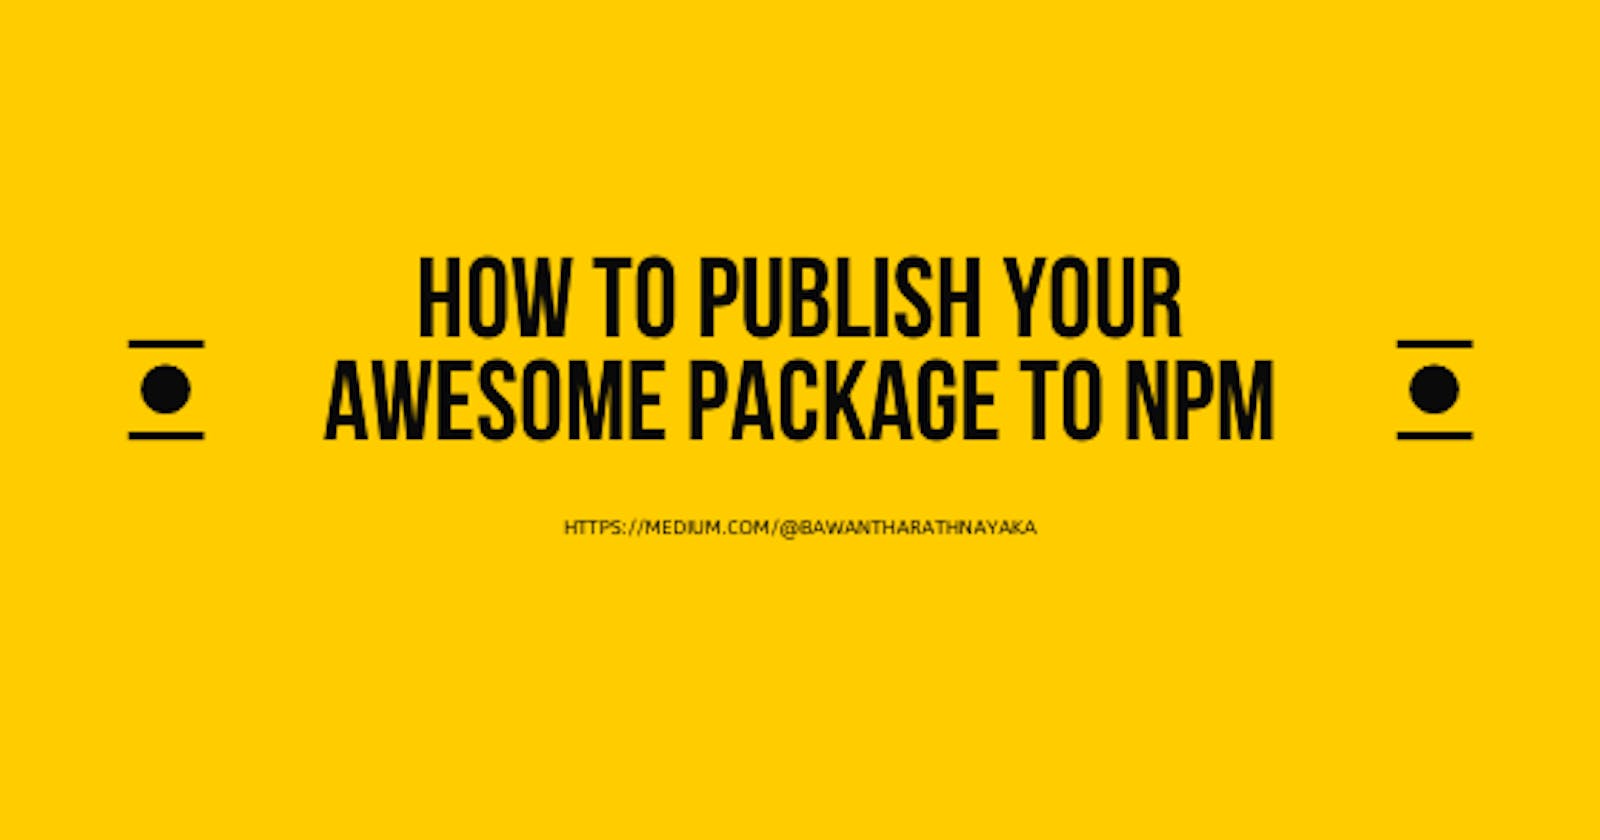 How to Publish your awesome package to NPM